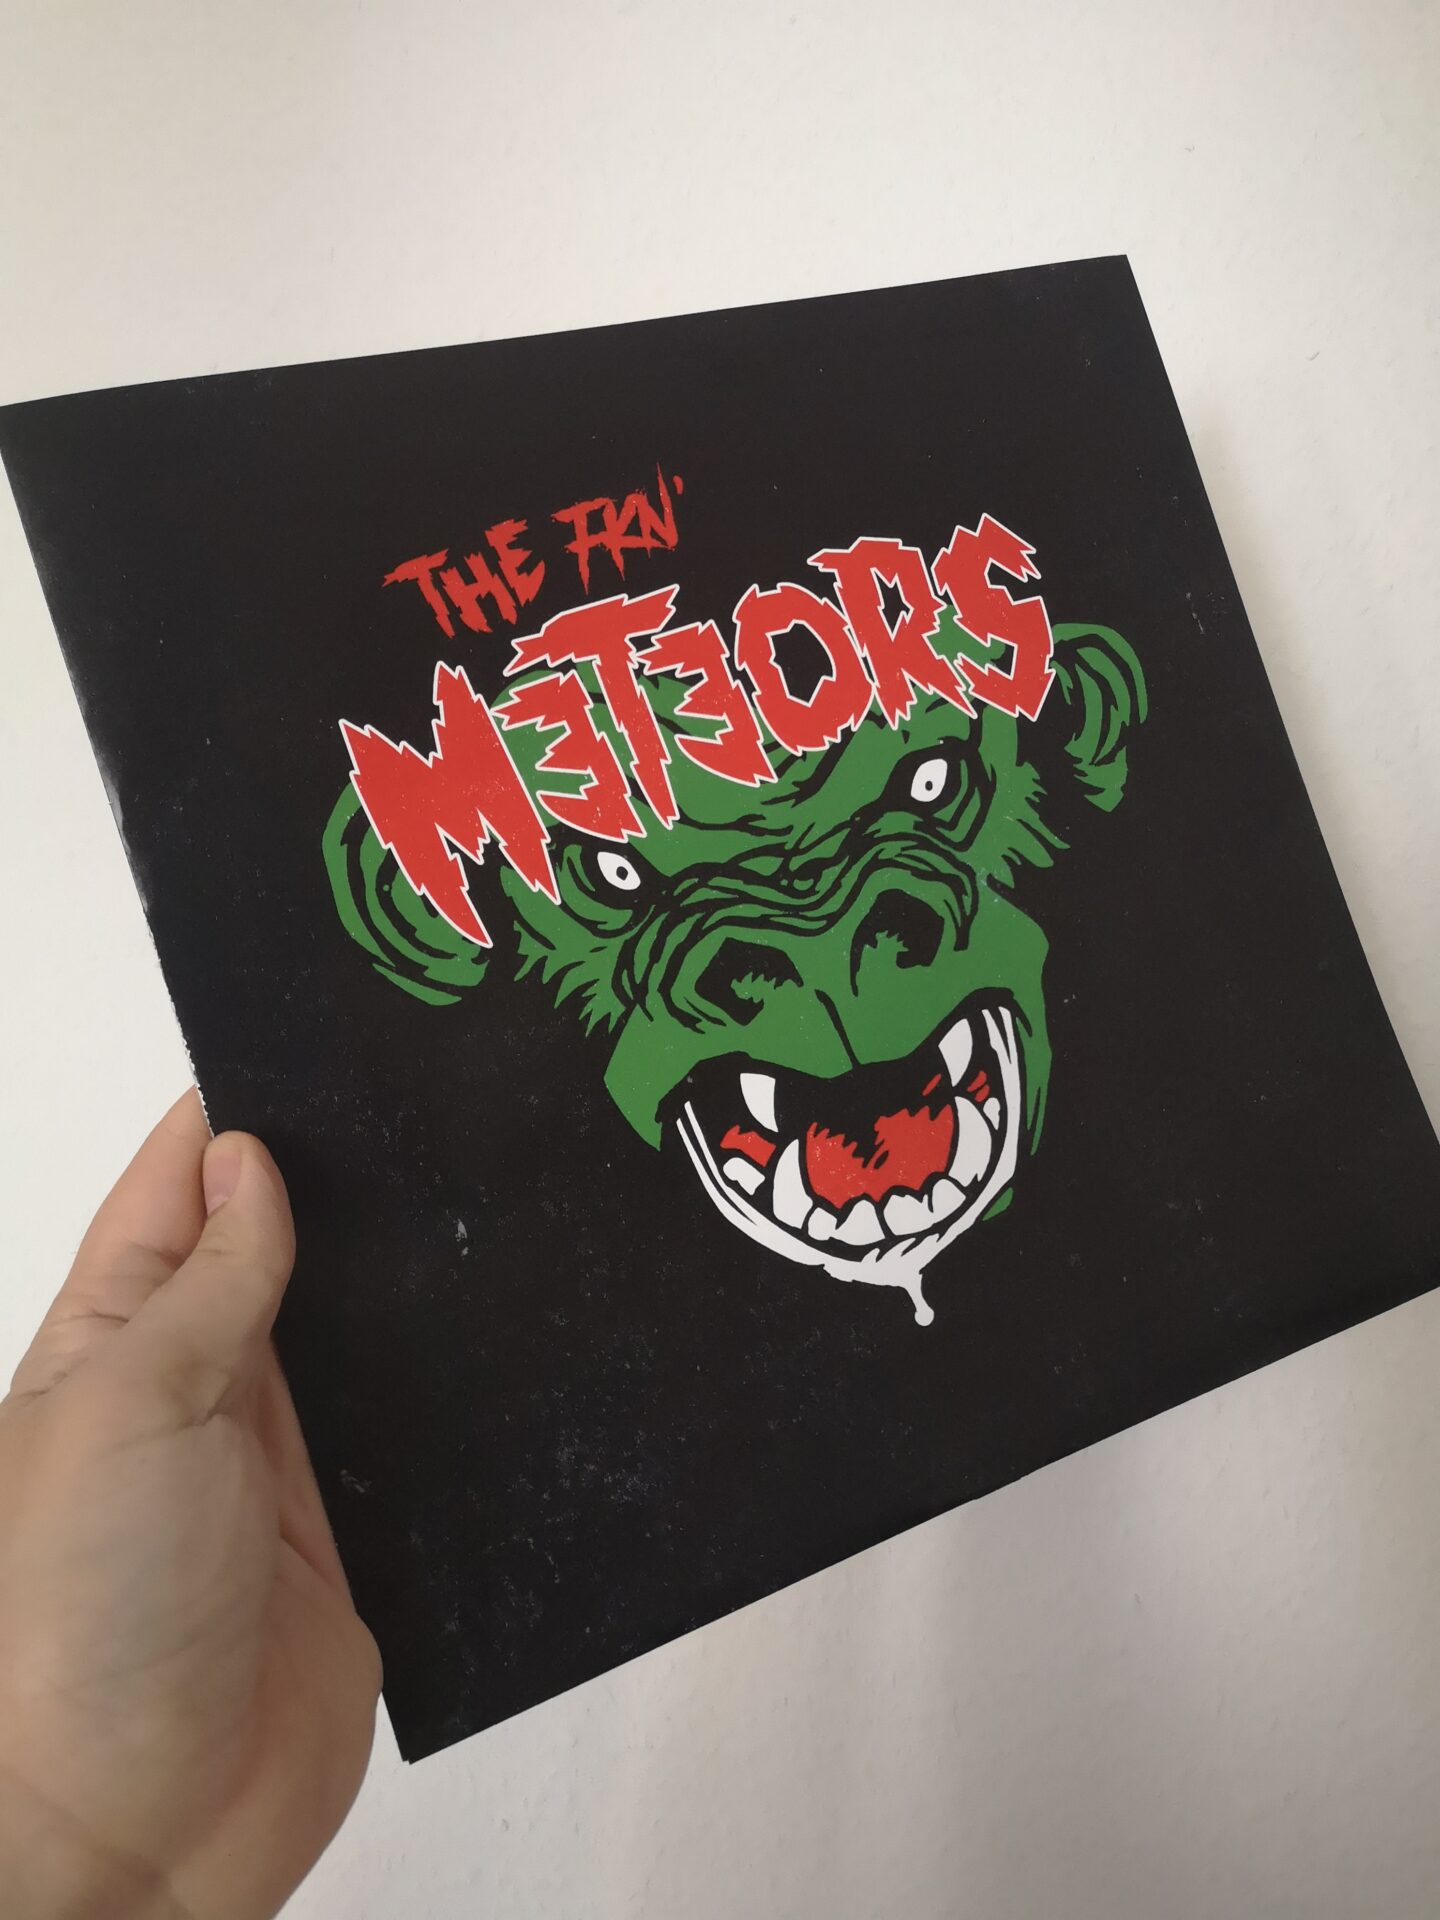 The Meteors - 40 days a rotting 3